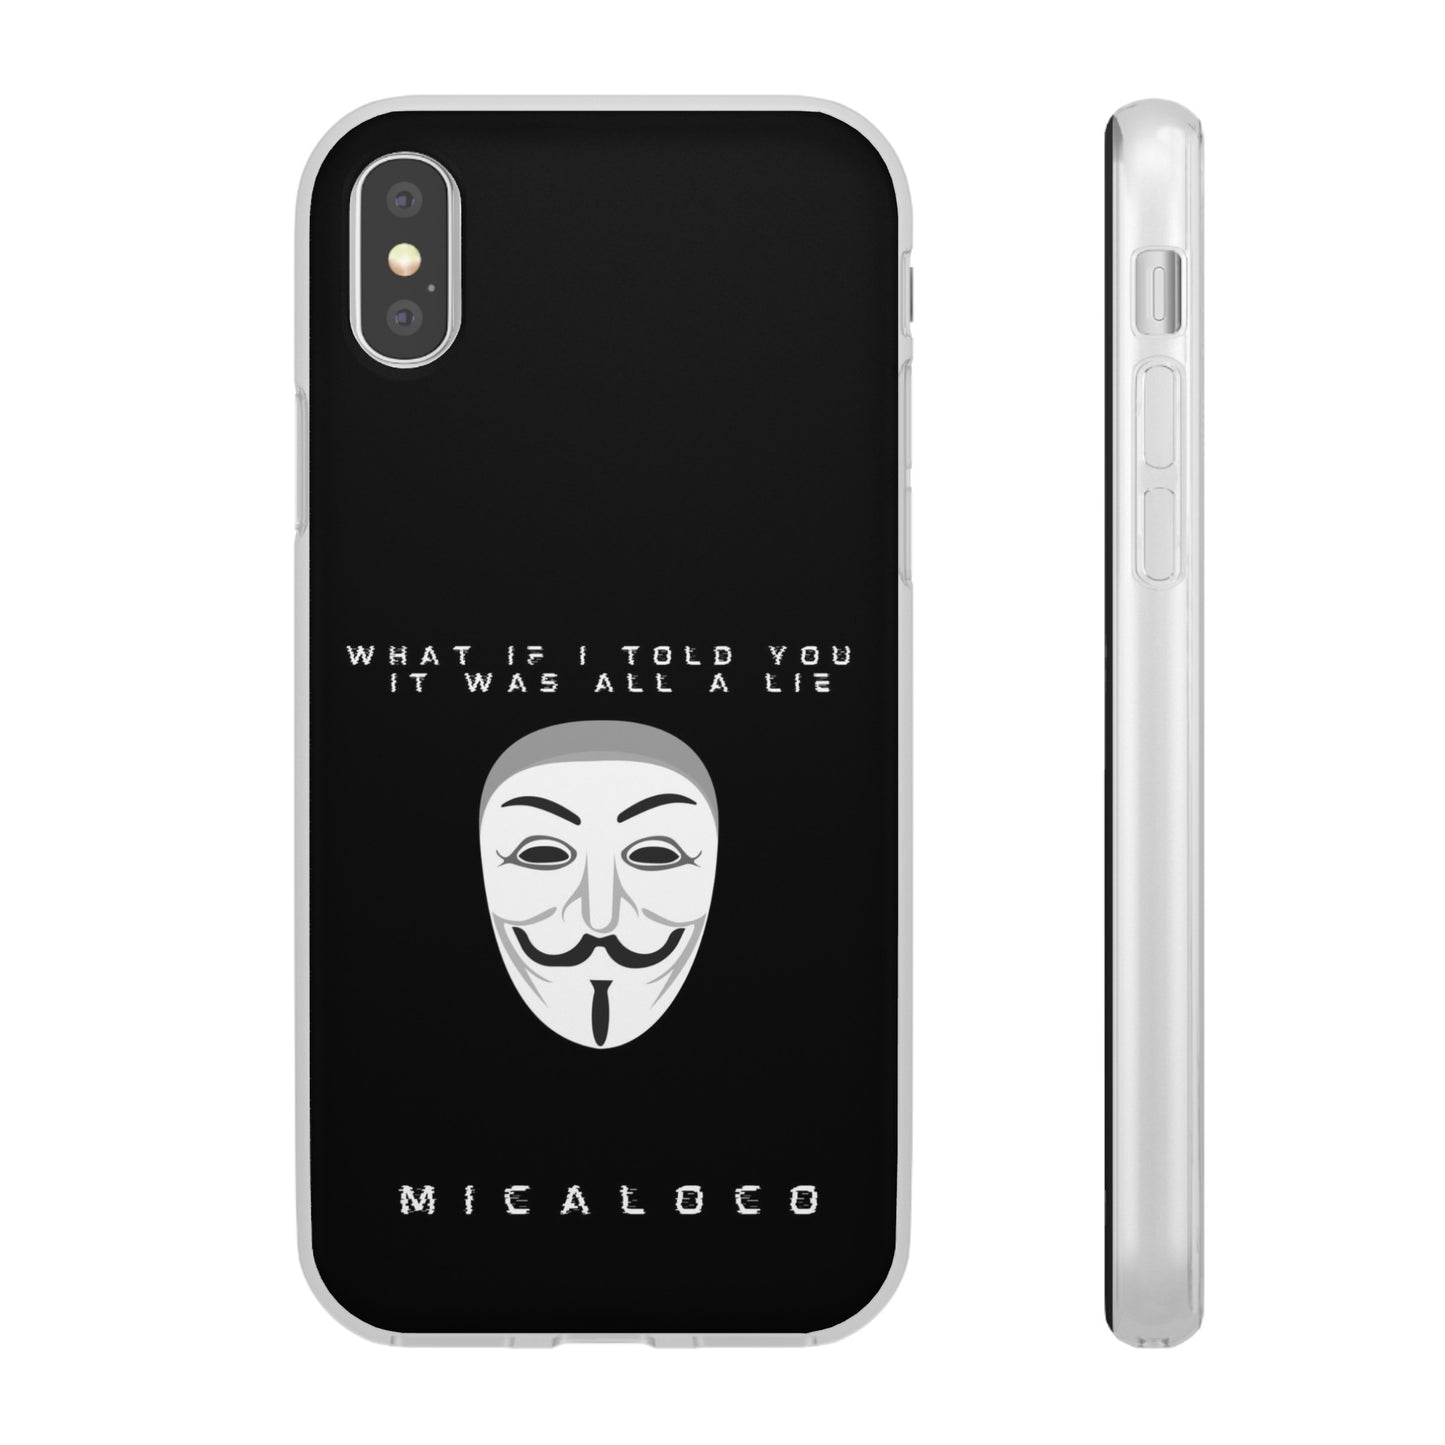 ALL A LIE (ANON. CONSPIRACY) BLACK FLEXI PH CASE (SUITS IPHONE AND SAMSUNG)